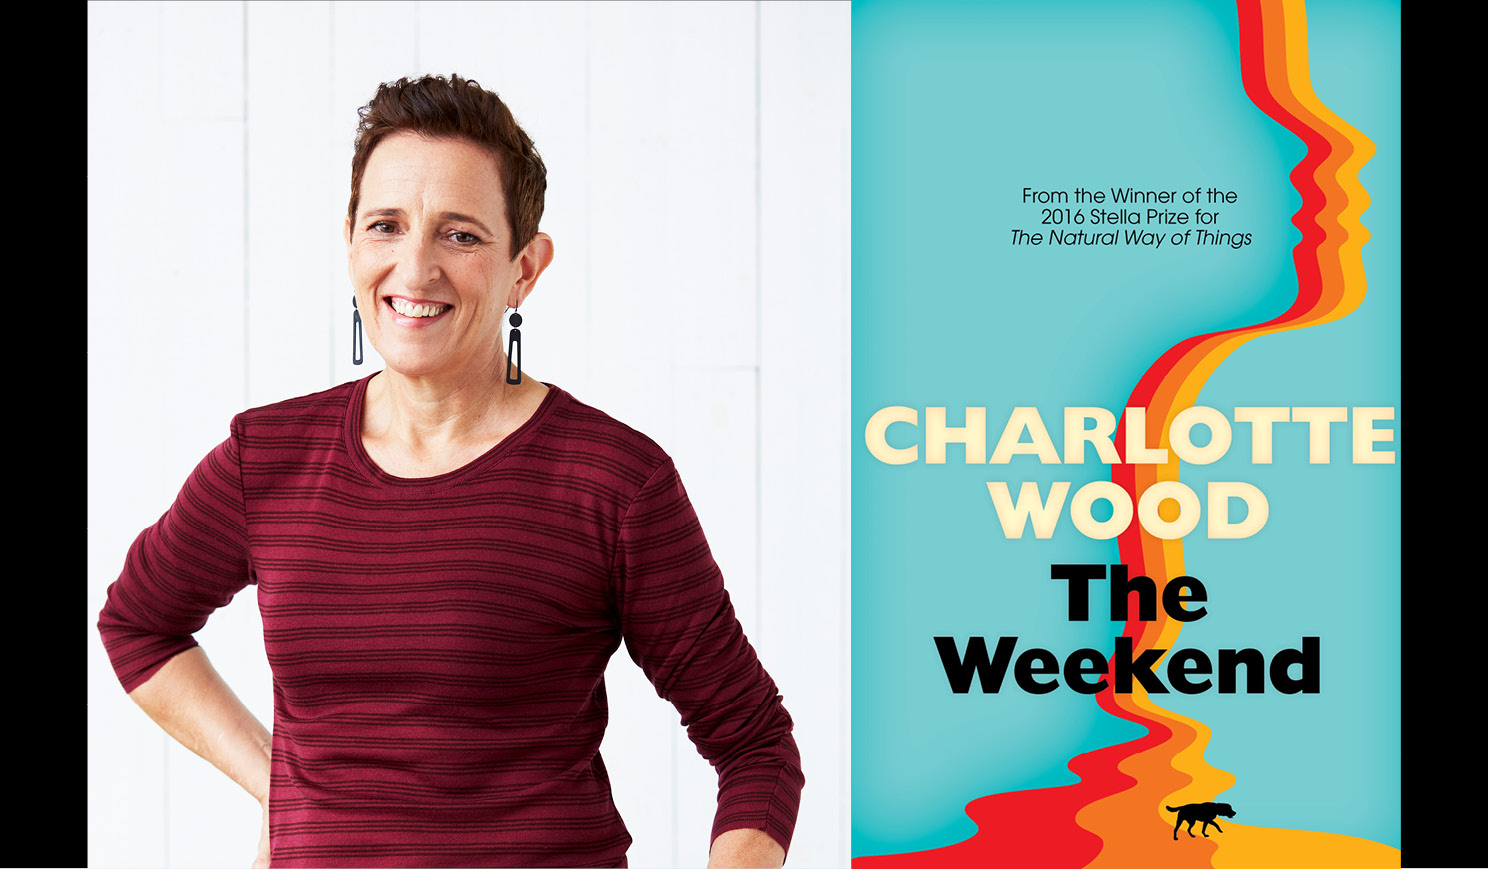 Charlotte Wood's headshot alongside the cover of her book The Weekend